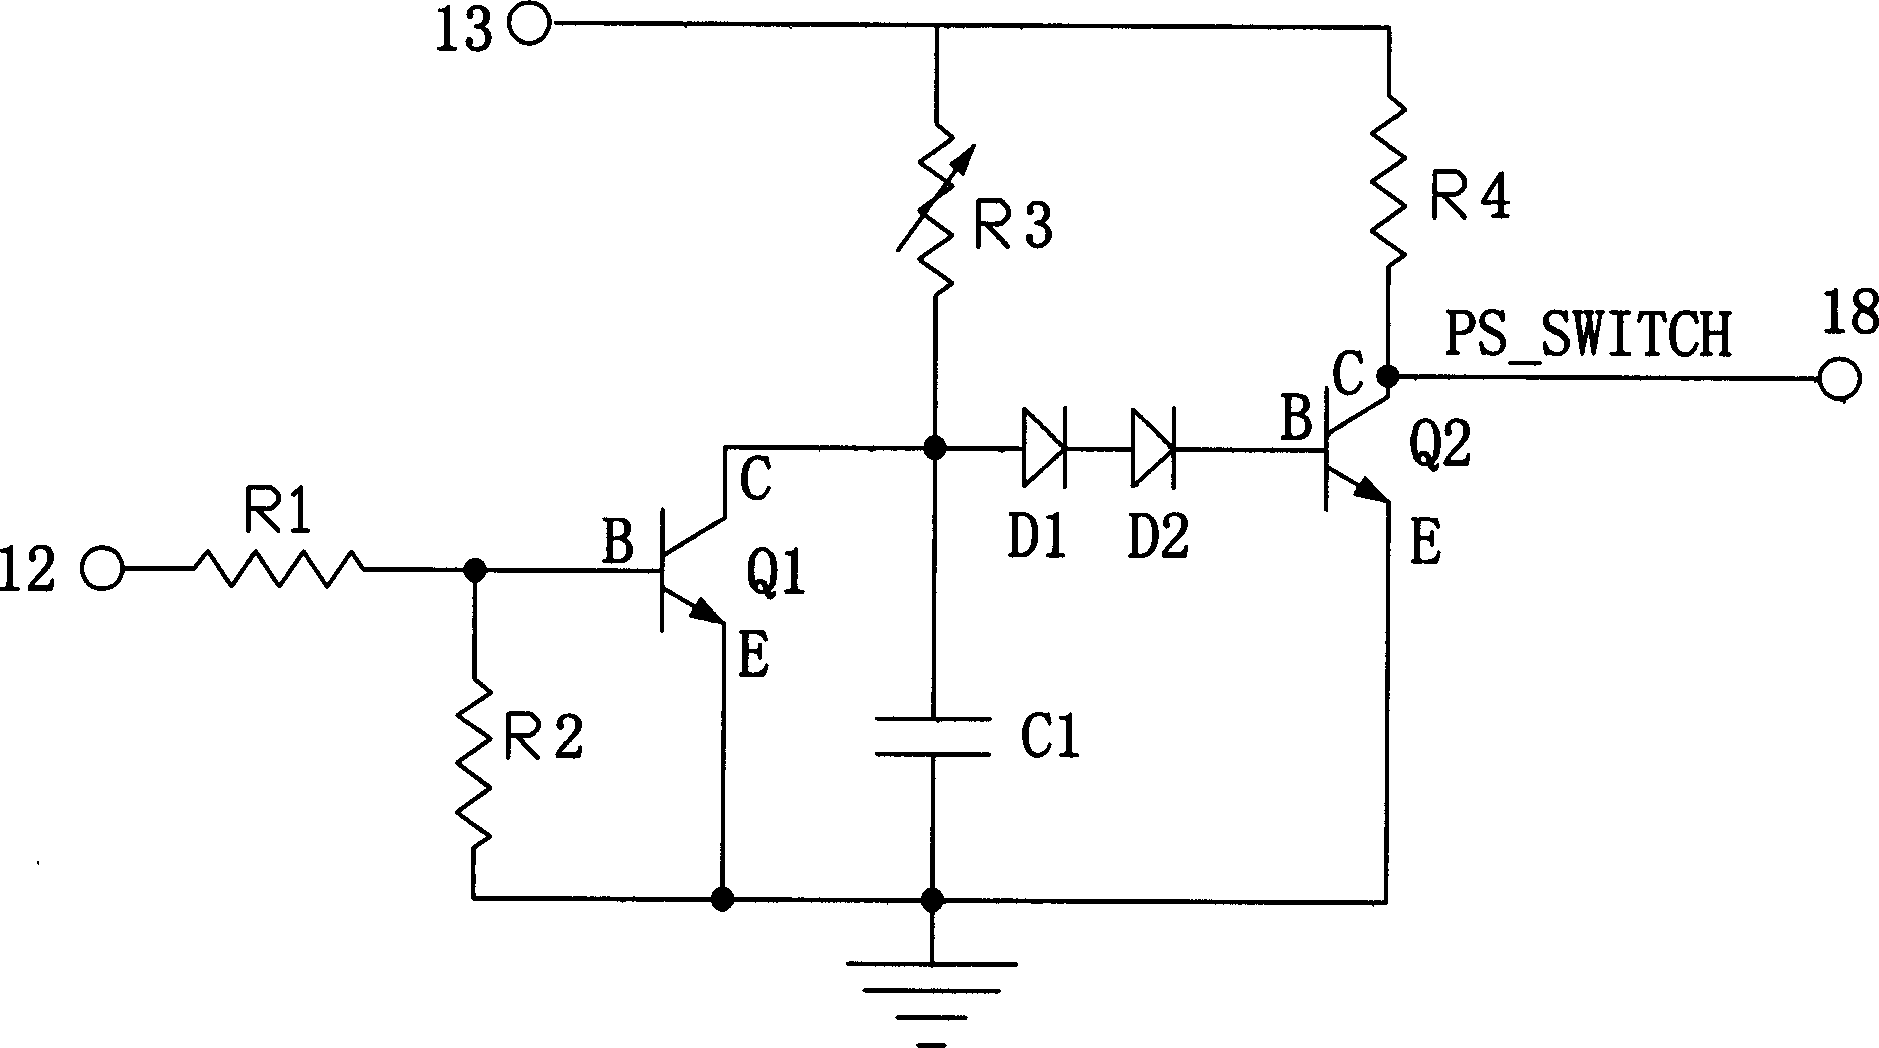 Computer system with re-starting control circuit